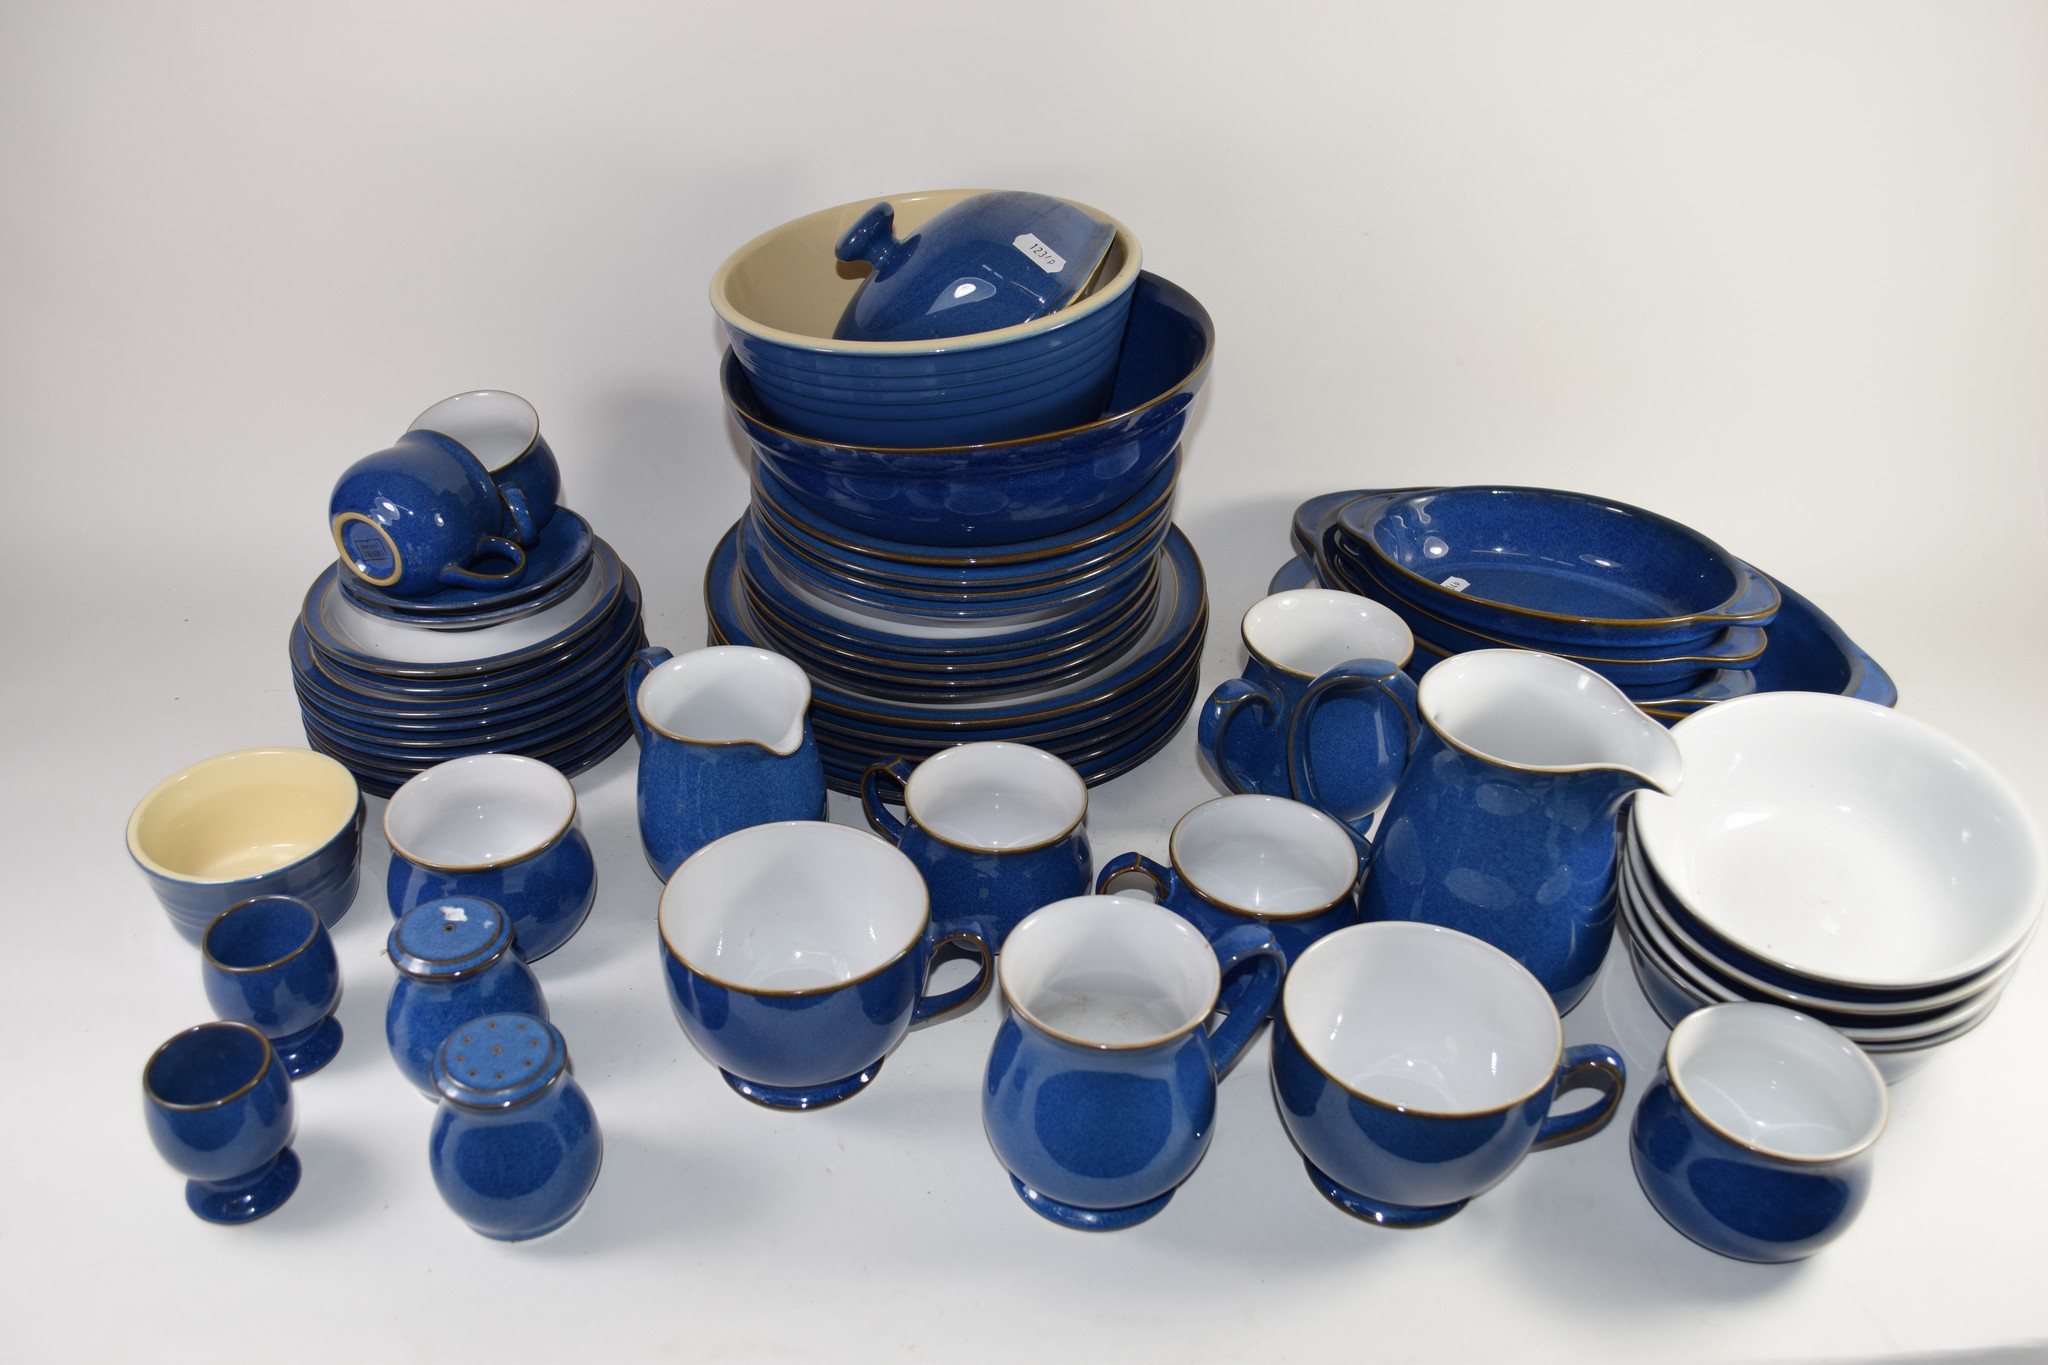 QUANTITY OF DENBY WARE BLUE GLAZED KITCHEN ITEMS INCLUDING TUREENS, DINNER PLATES, SIDE PLATES, CUPS